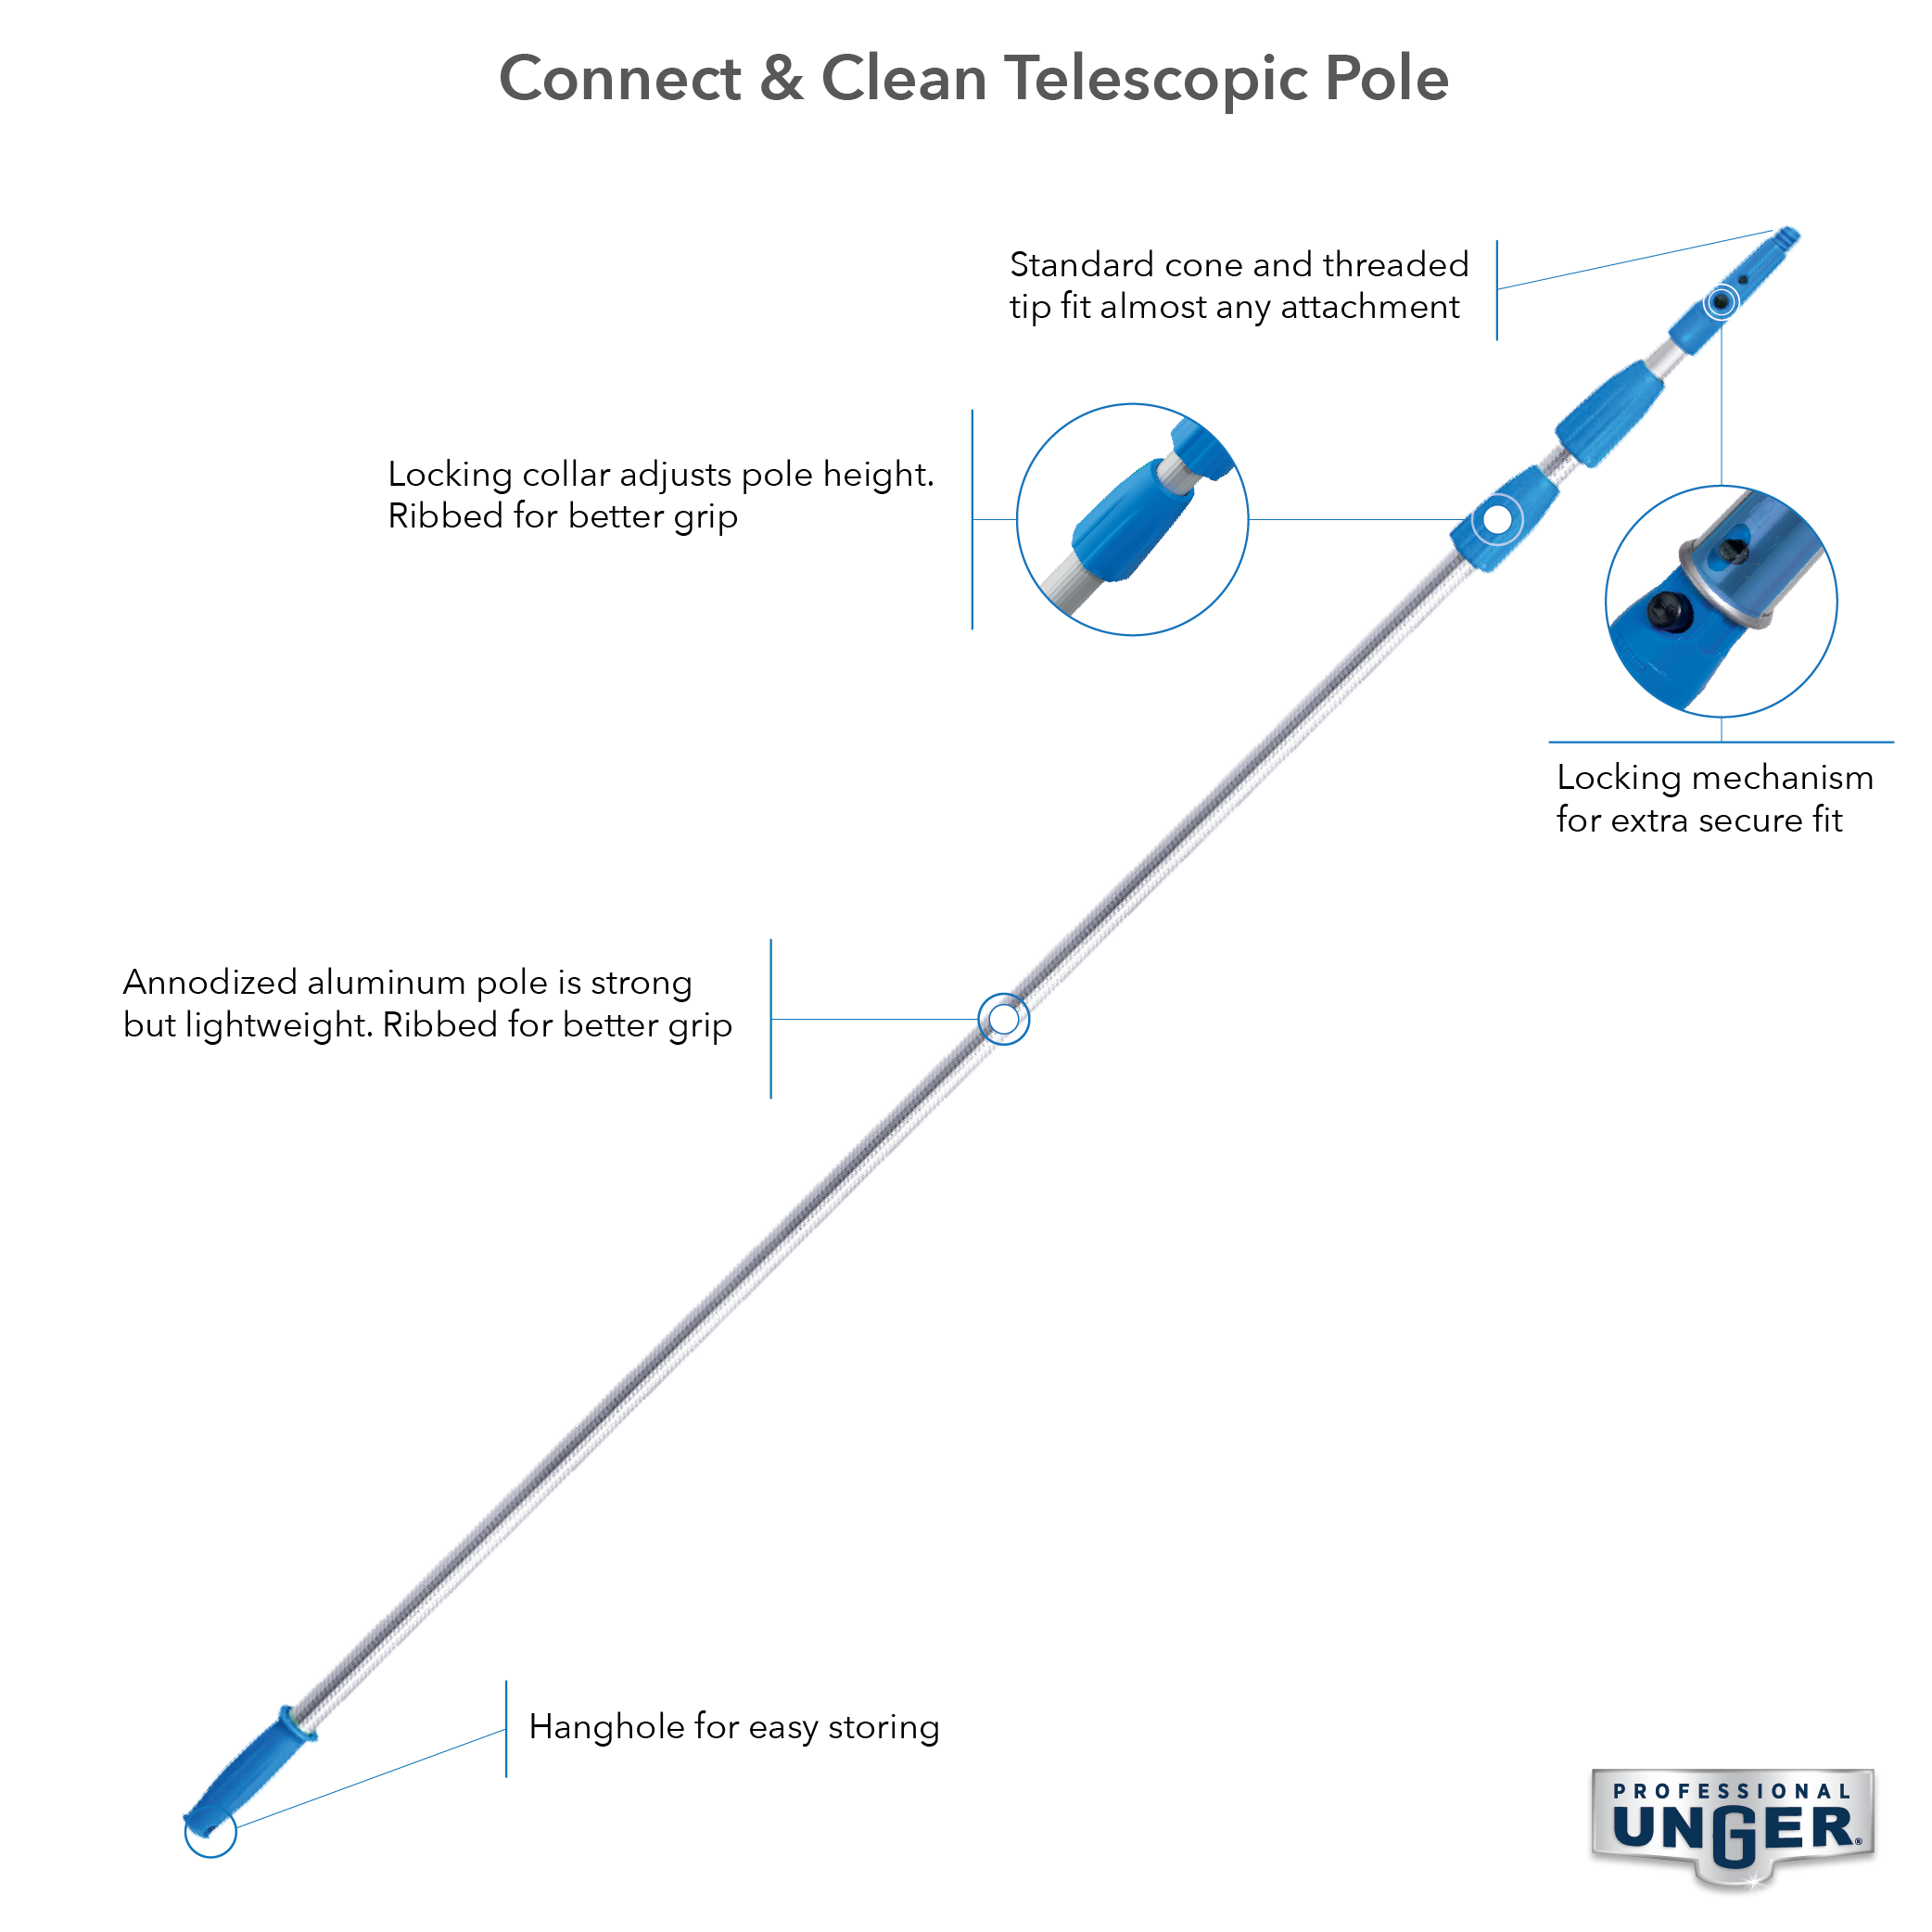 Connect and clean telescopic pole - Unger poles